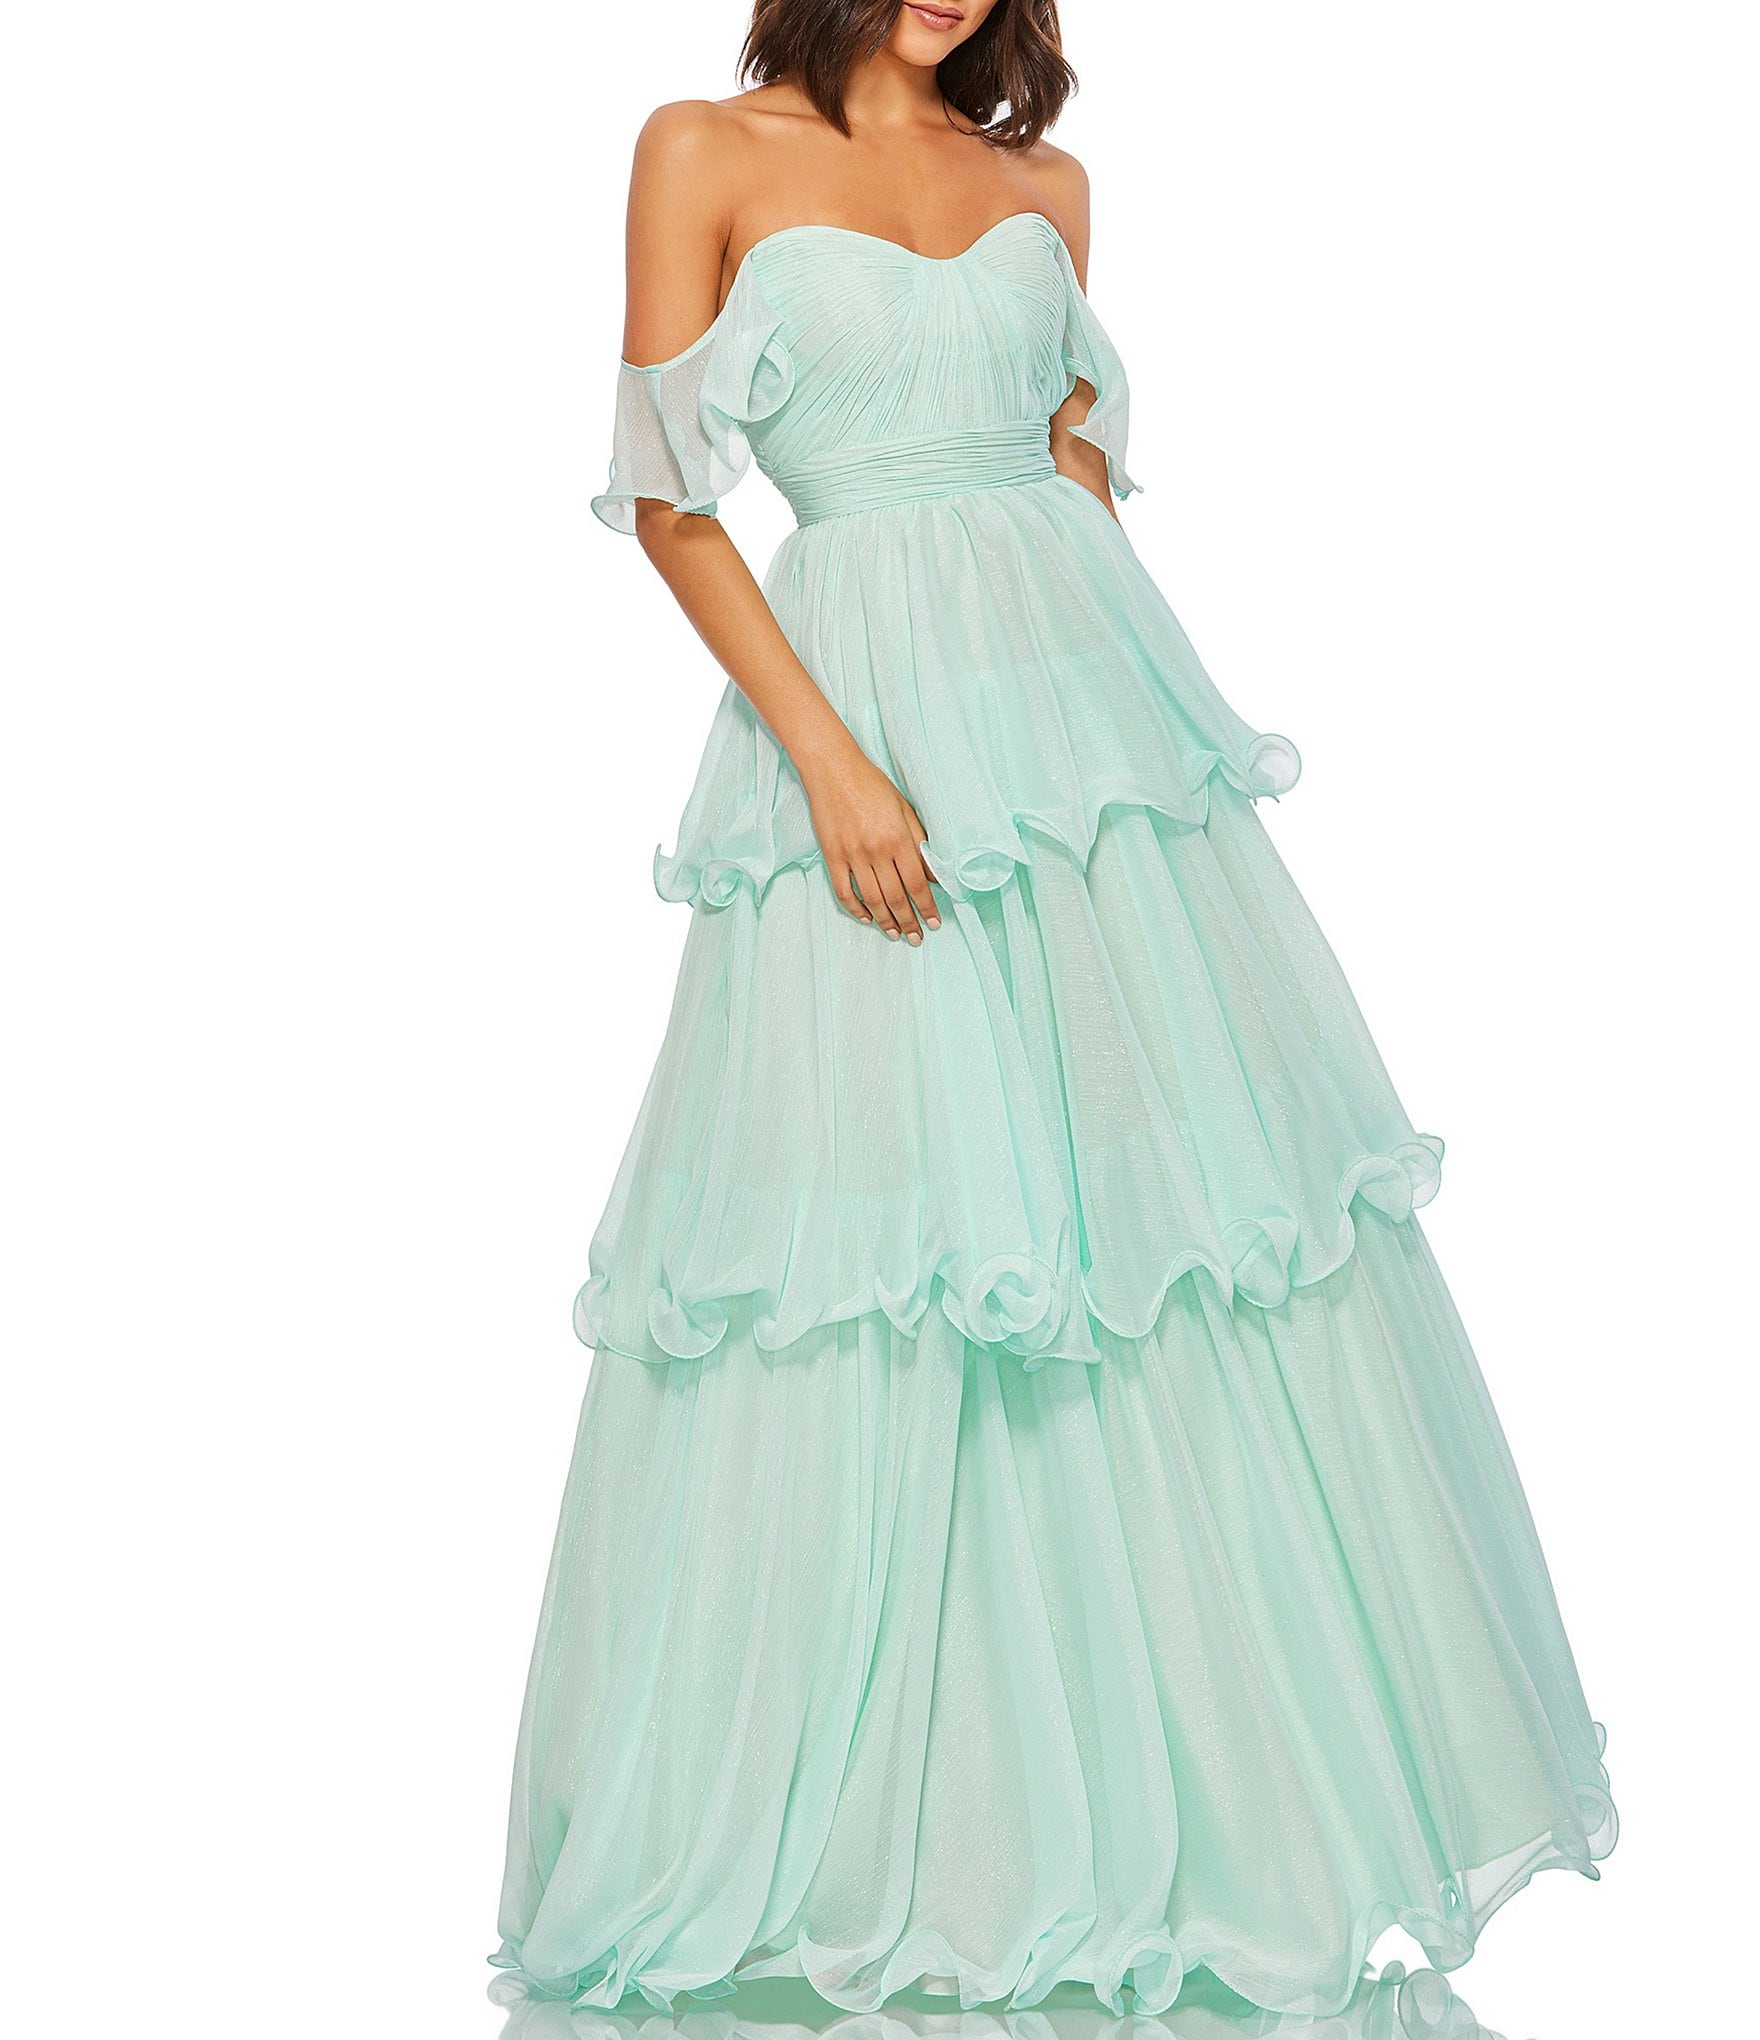 Ruffled Off-shoulder Sweetheart Blue Tulle Prom Dress